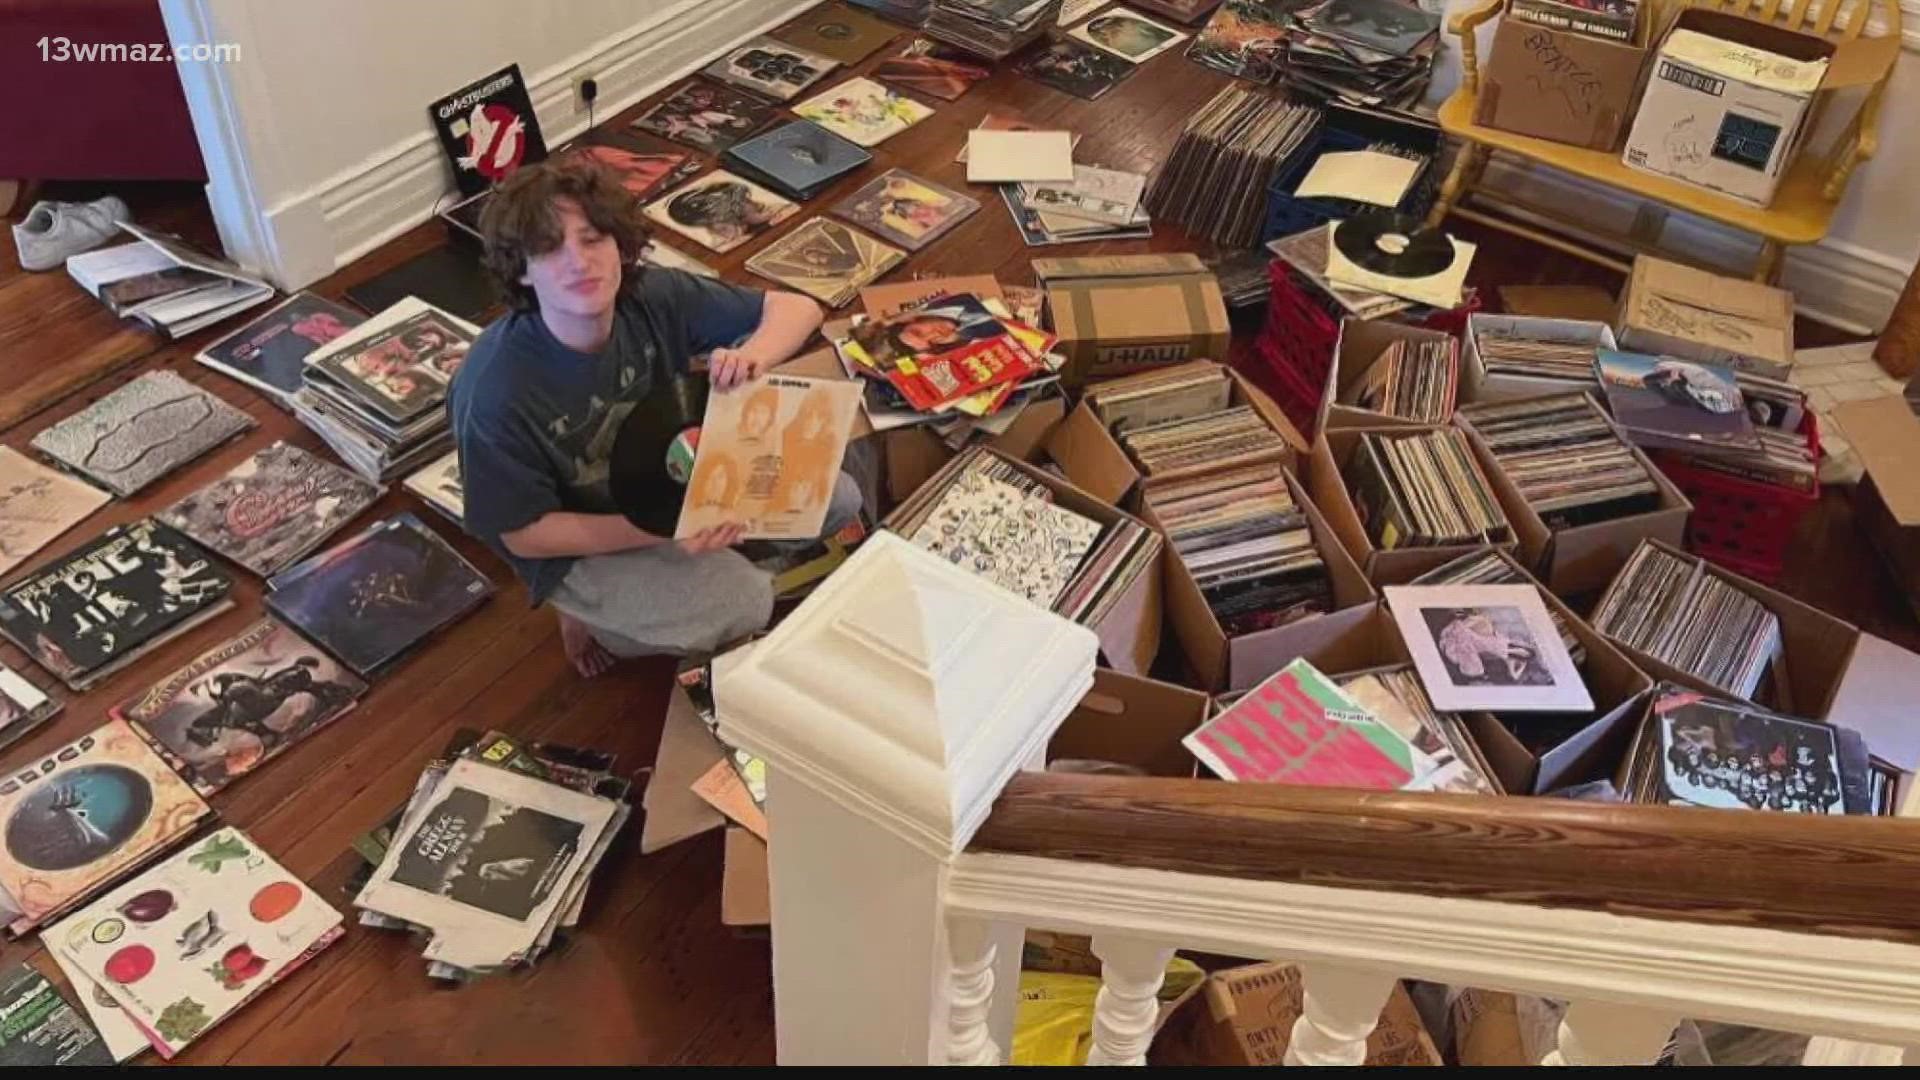 Noah Silver creates videos dedicated to vinyl records and posts them on TikTok. He's gained more than 90,000 followers and is opening a store in Mercer Village.